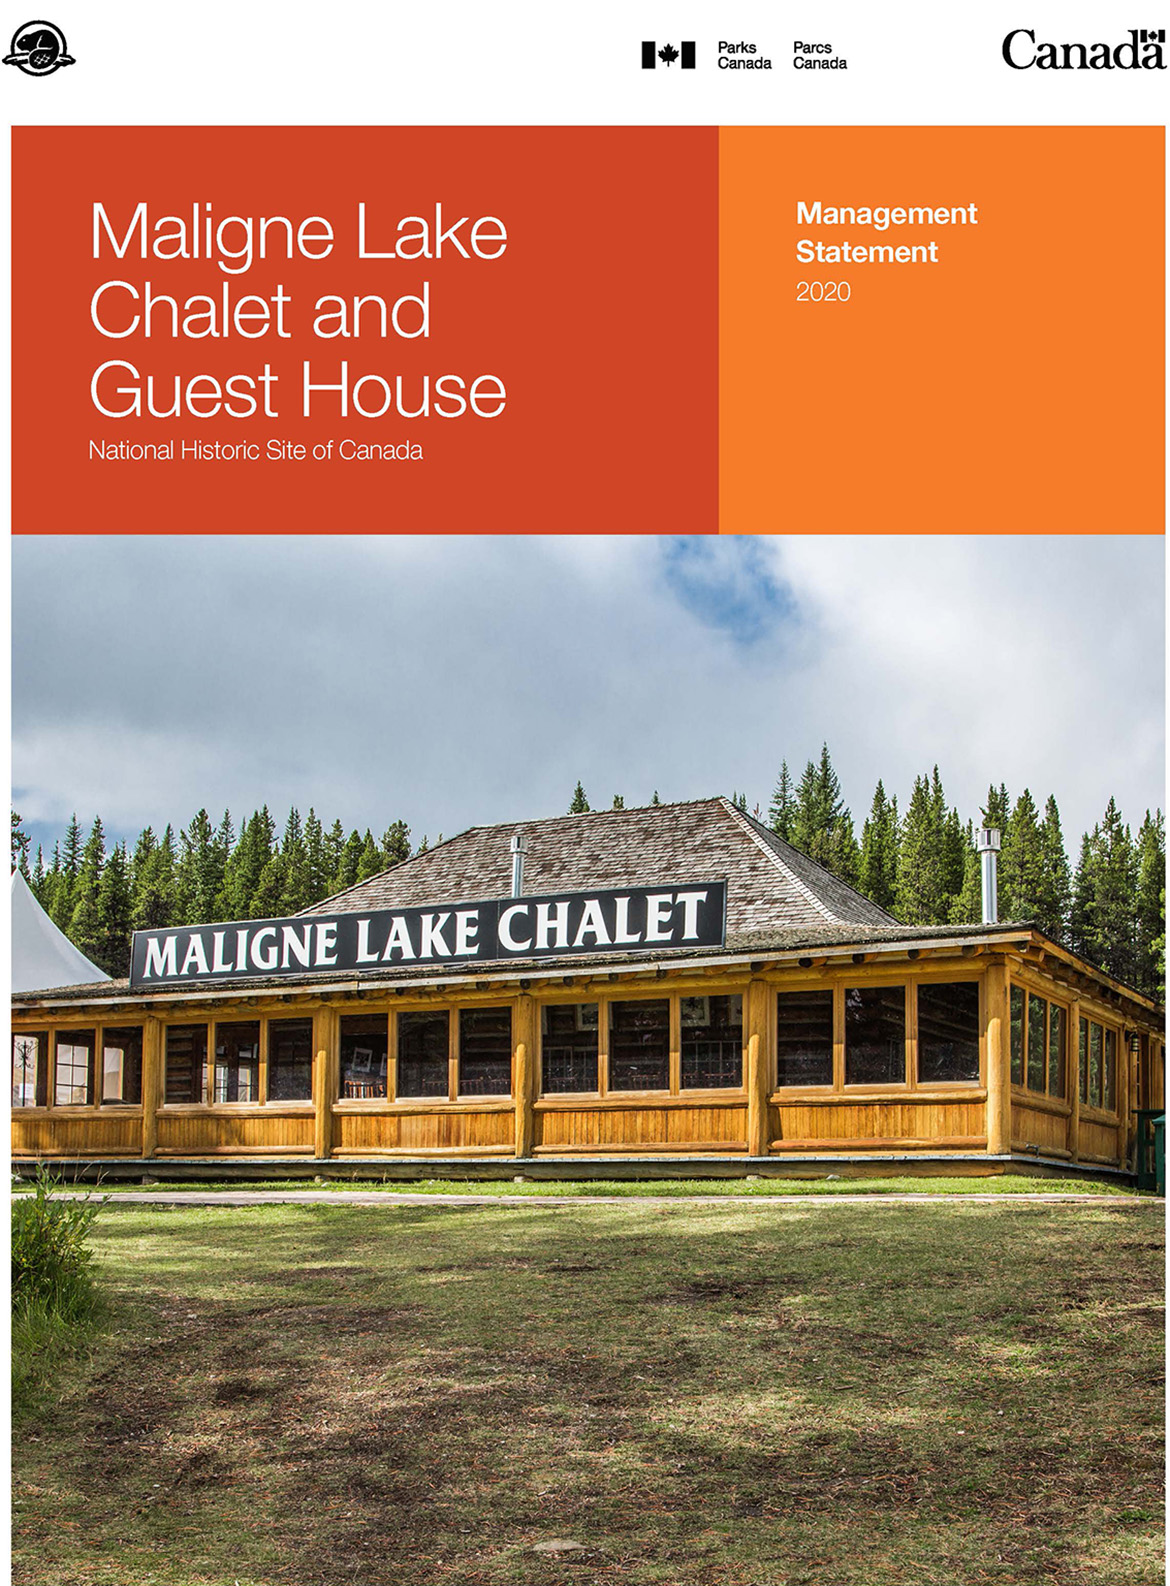 Maligne Lake Chalet. Two orange rectangles. Written in white text are the words Maligne Lake Chalet and Guest House National Historic Site. Management Statement 2020